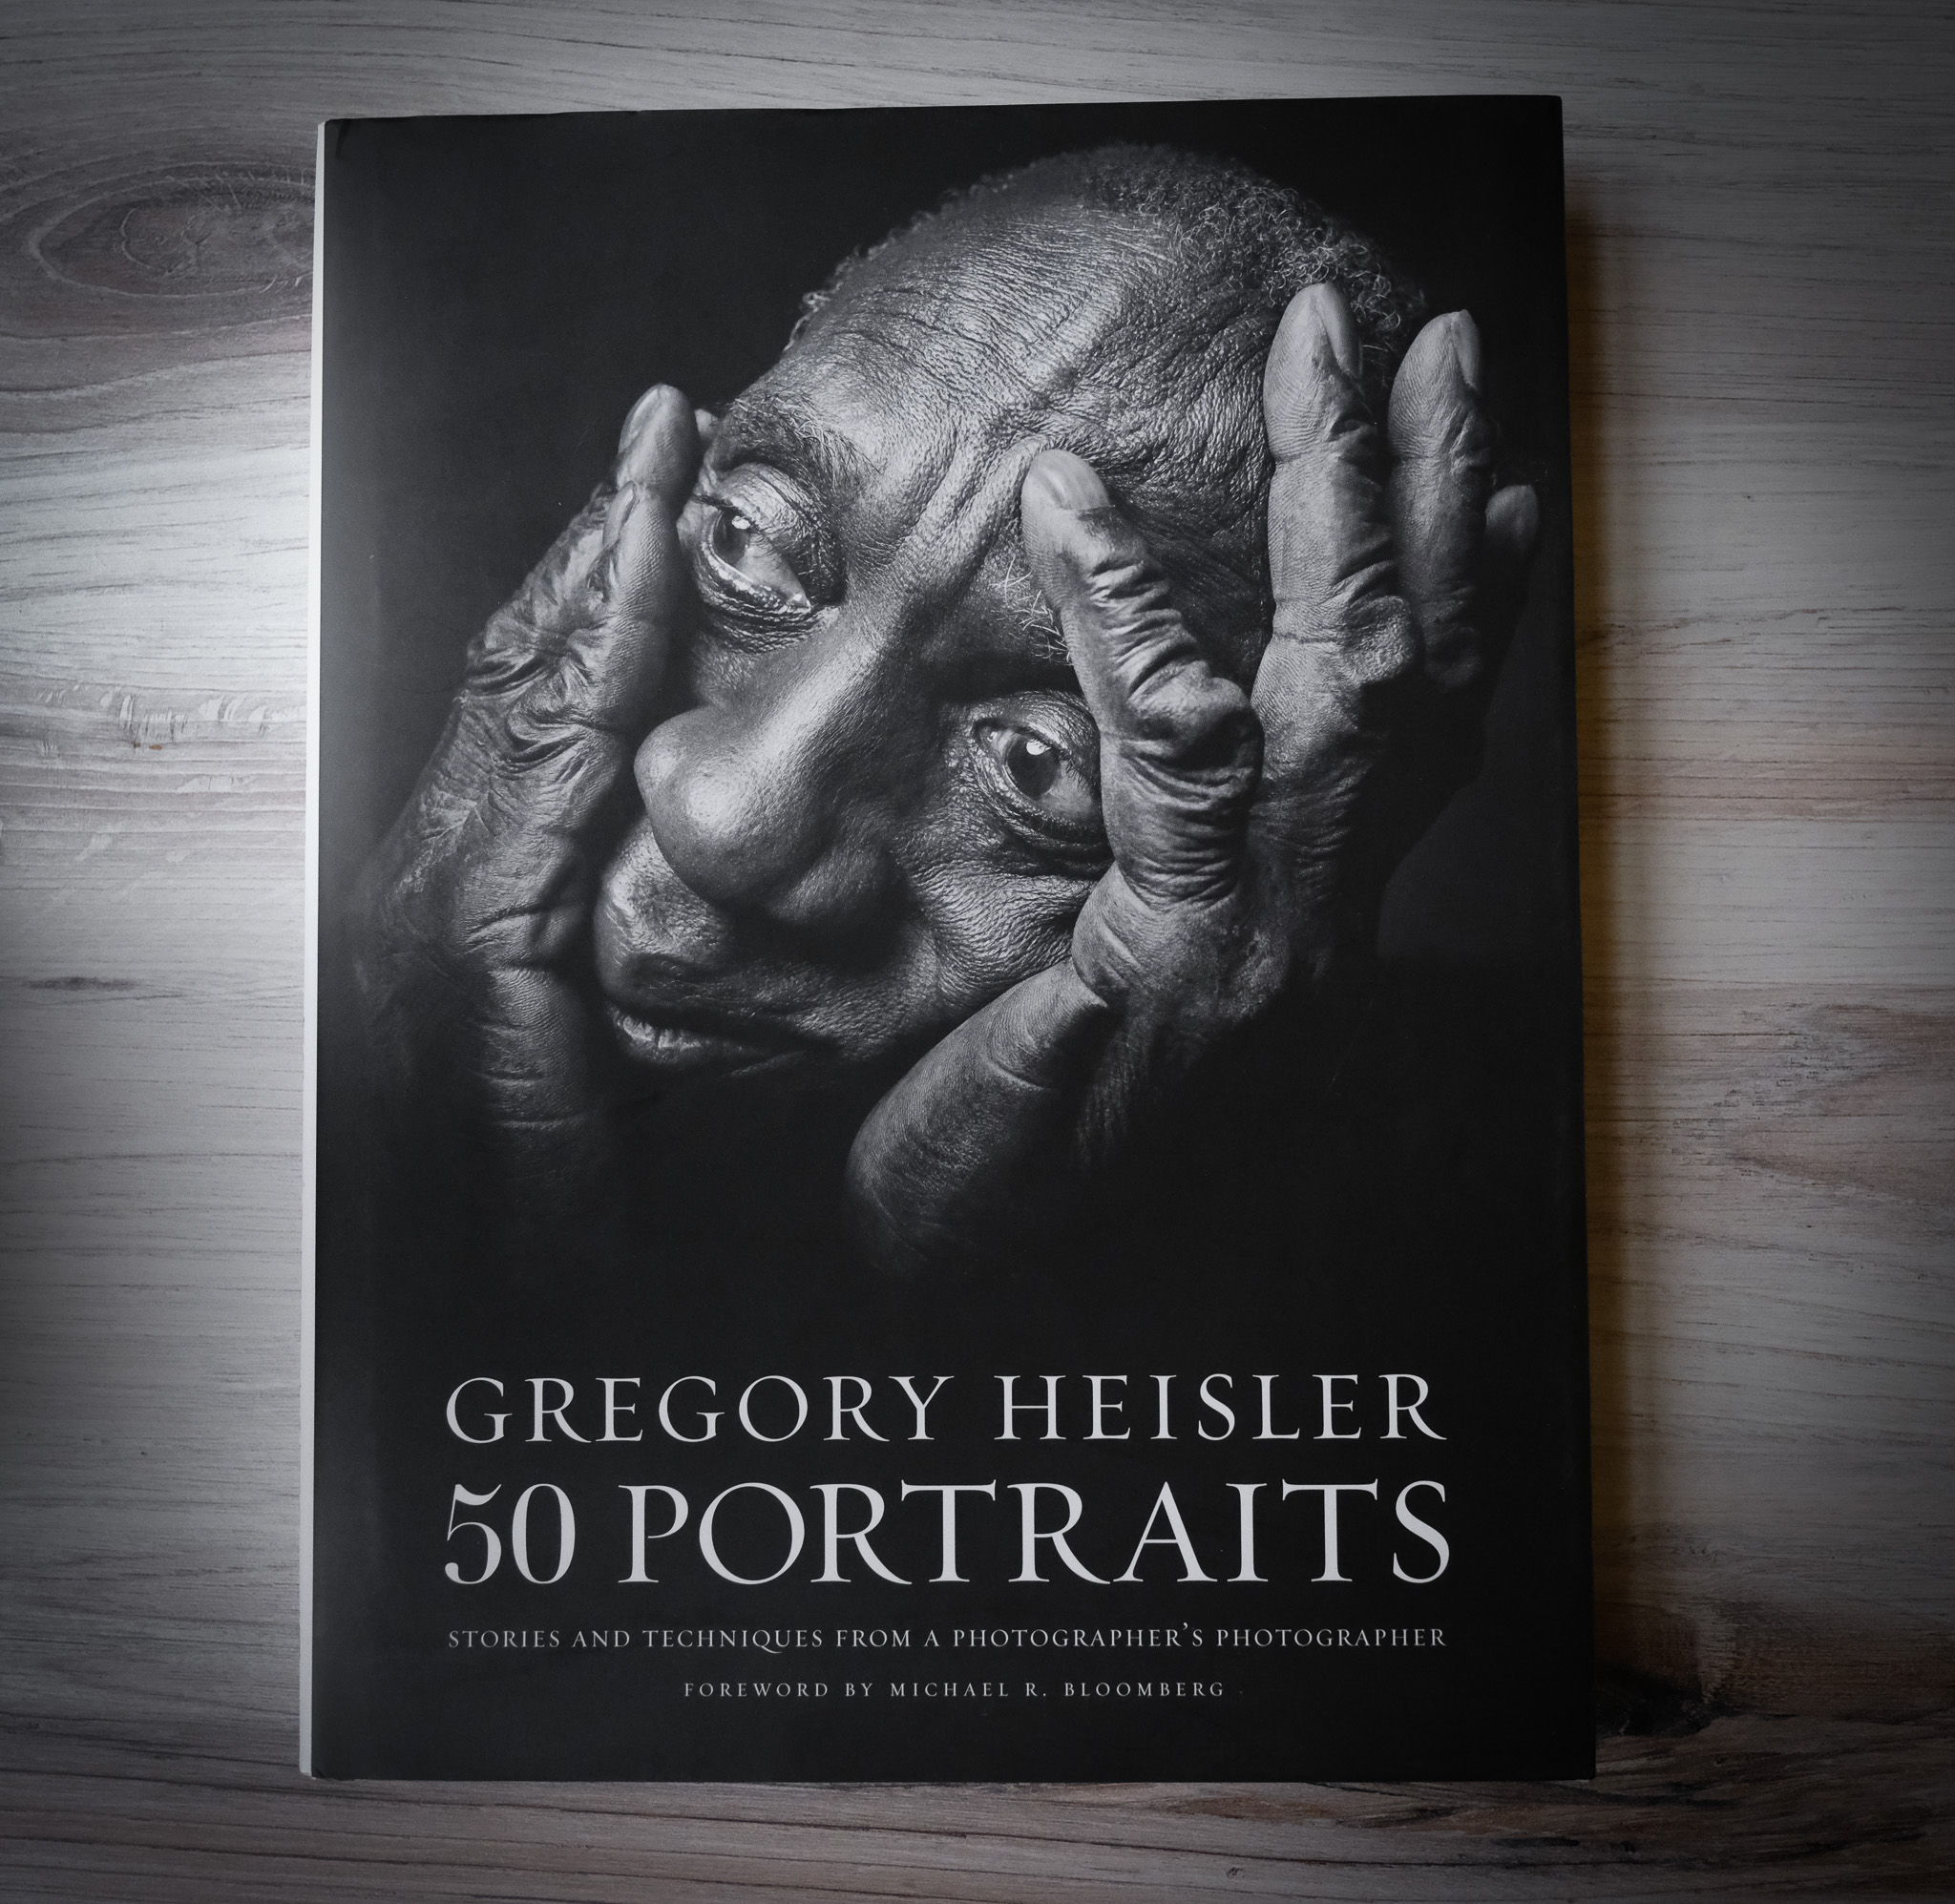 The 20 Best Photography Books of All Time